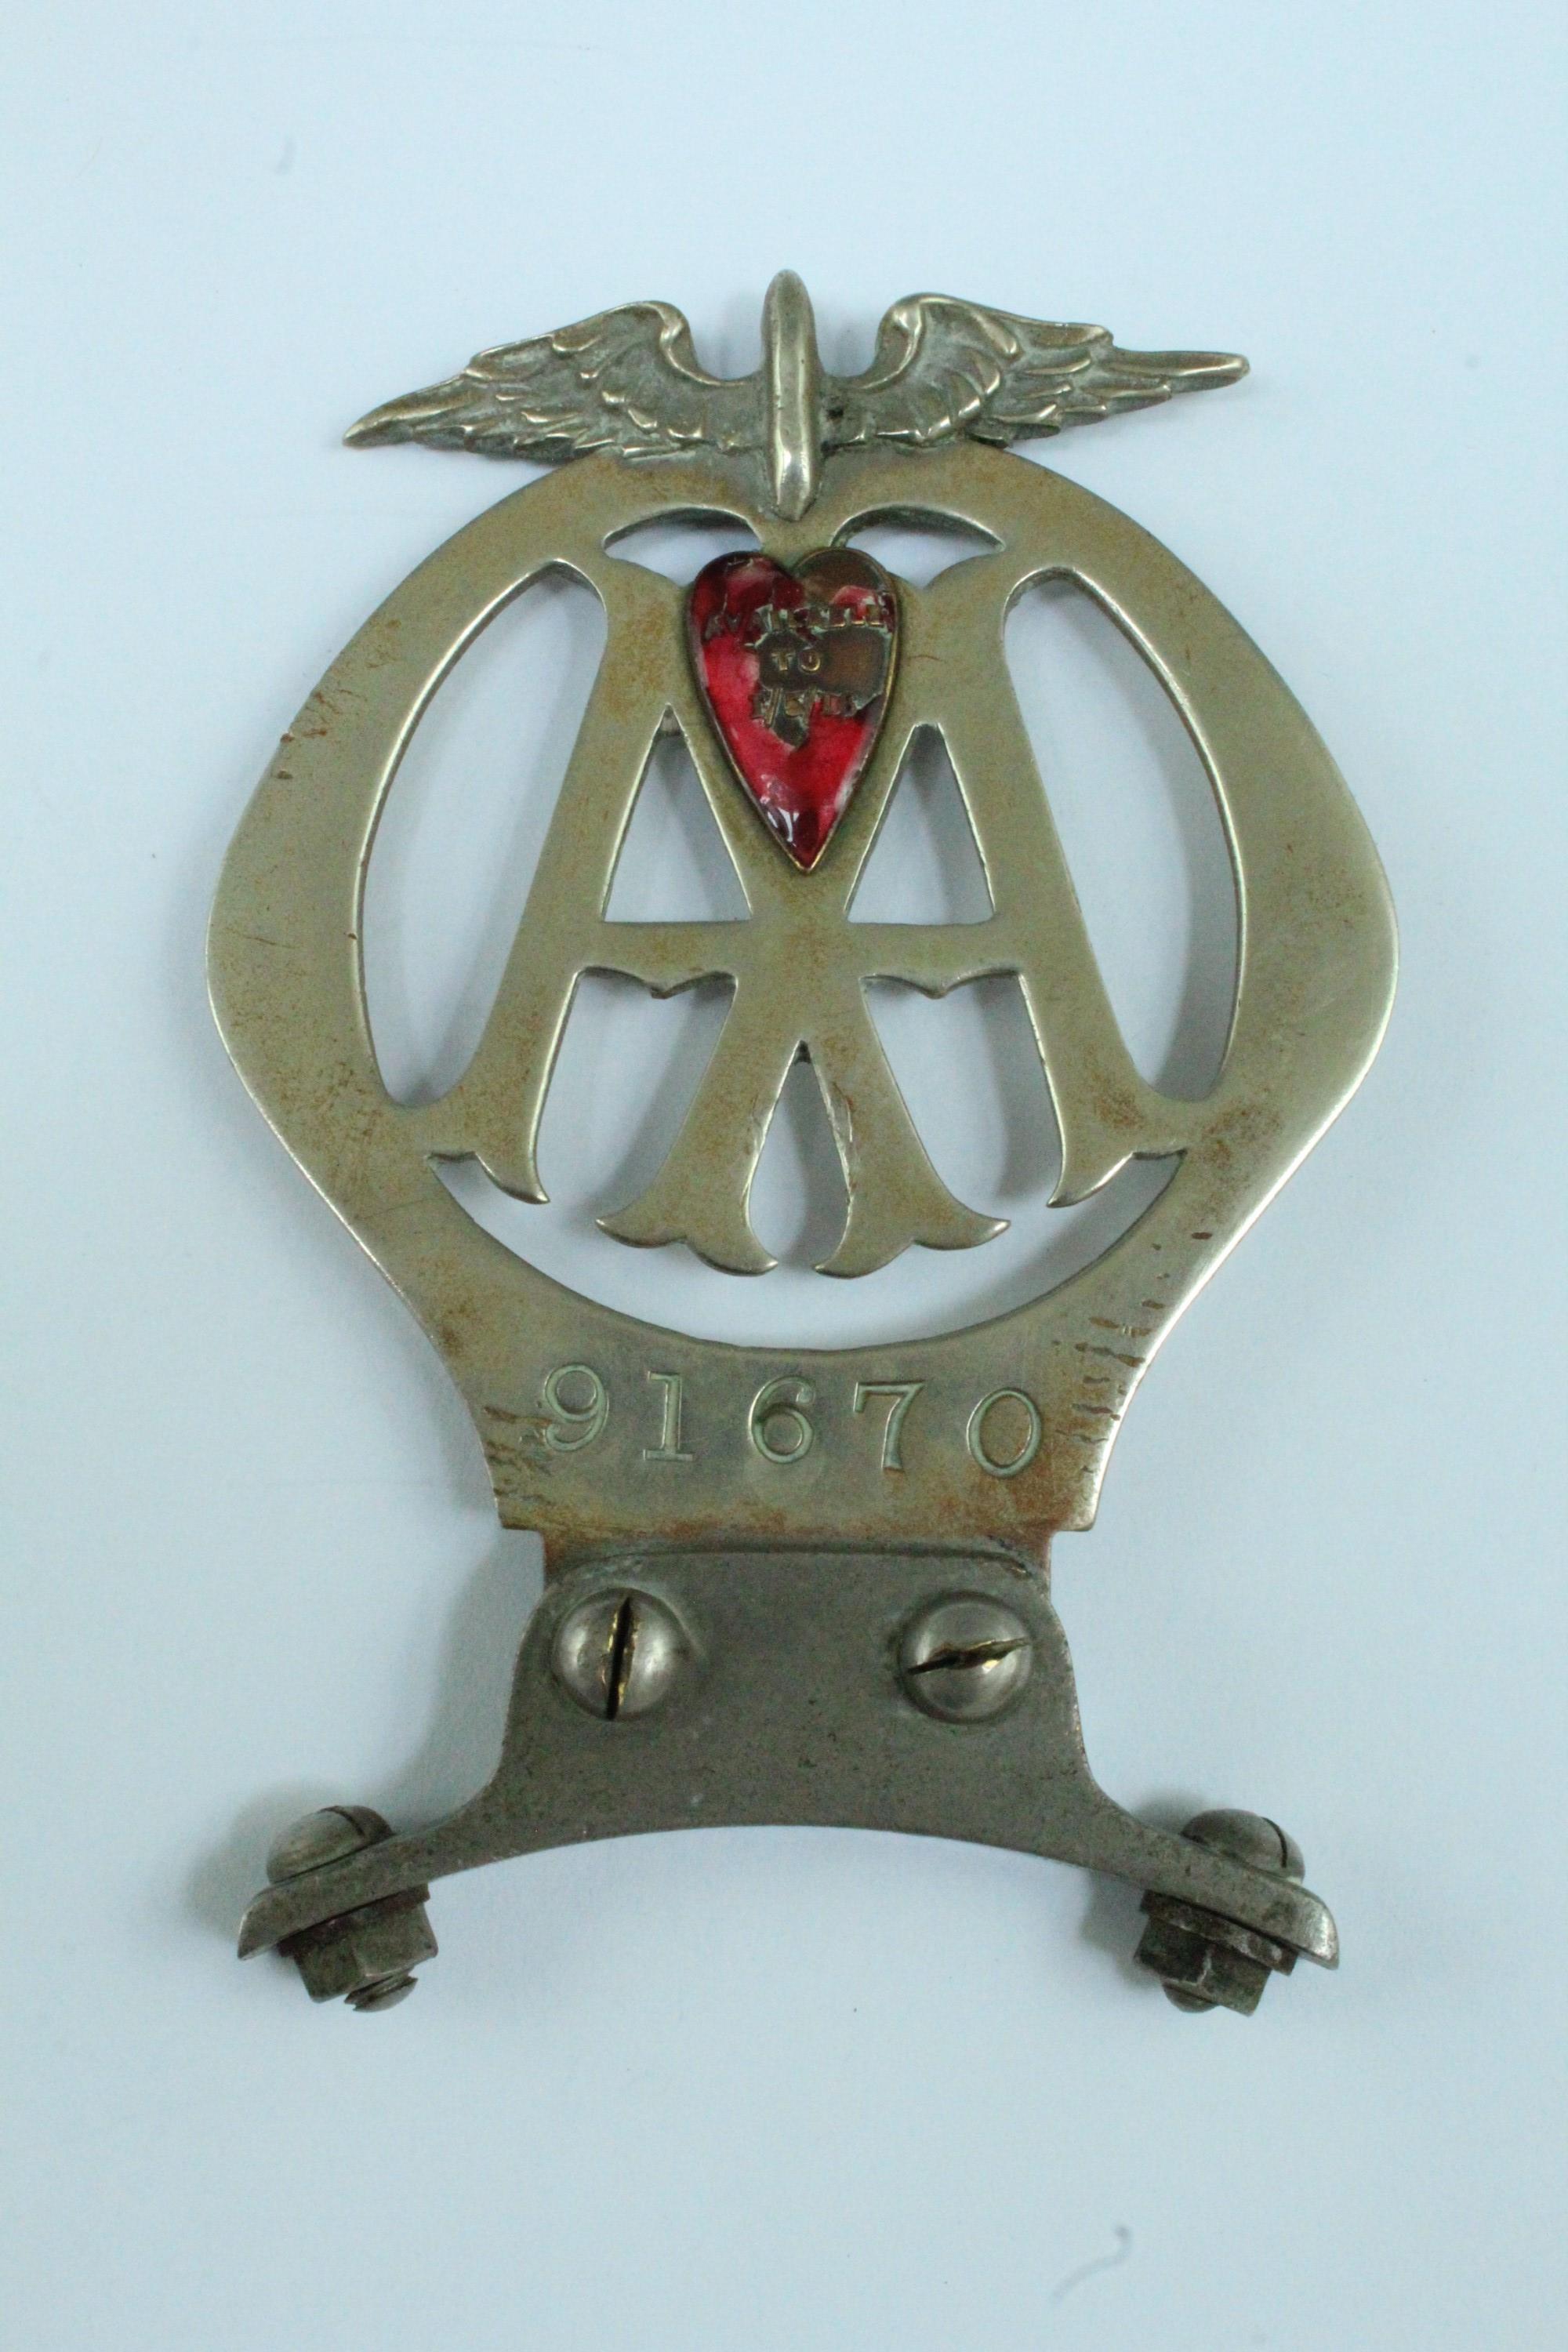 A 1916 AA car badge, number 91670, bearing an enamelled red heart subscription renewal token " - Image 2 of 2